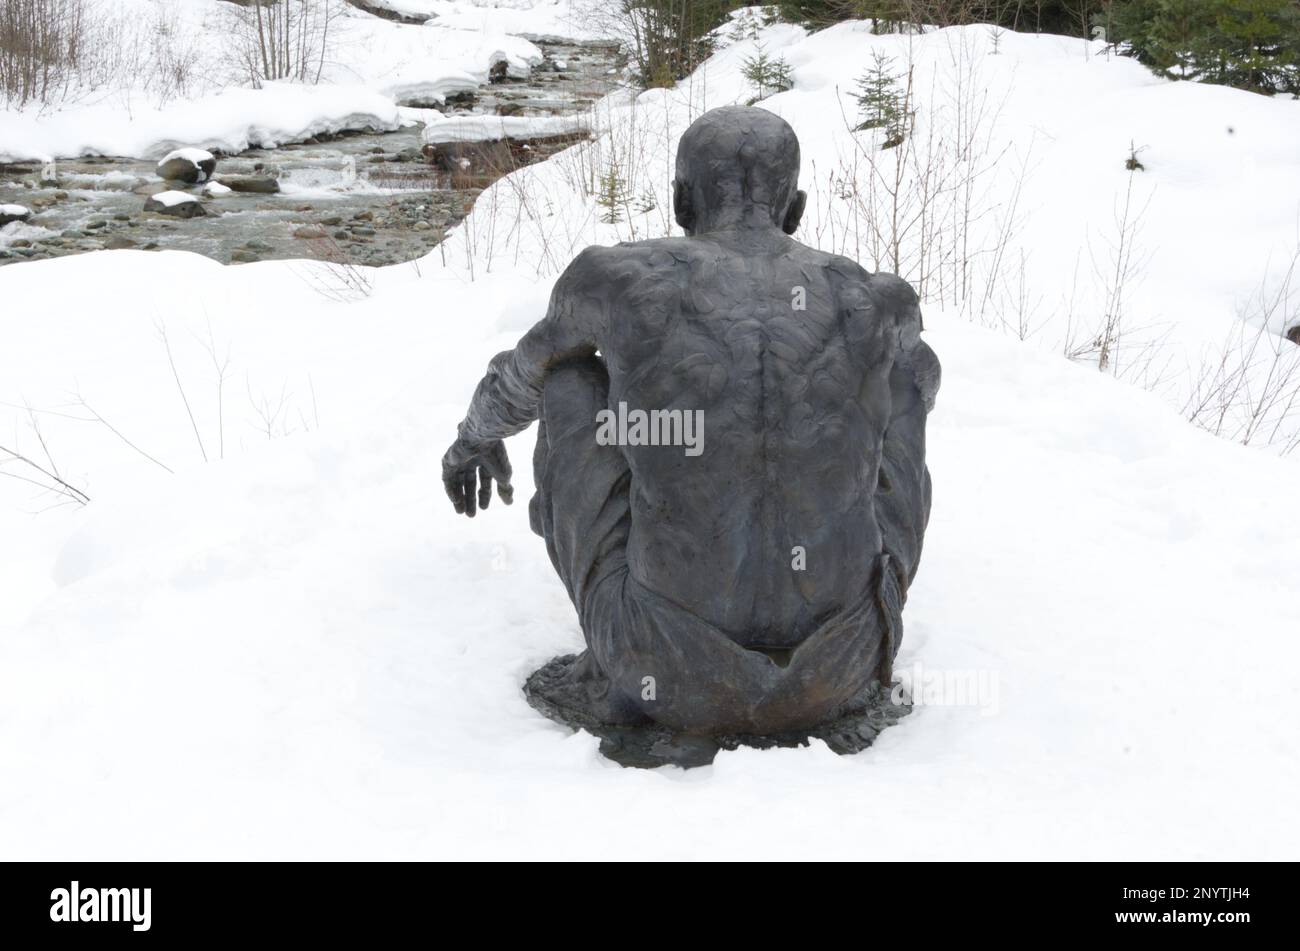 Backview of Jeri, a bronze sculpture by James Stewart, Whistler, British Columbia, Canada. Stock Photo